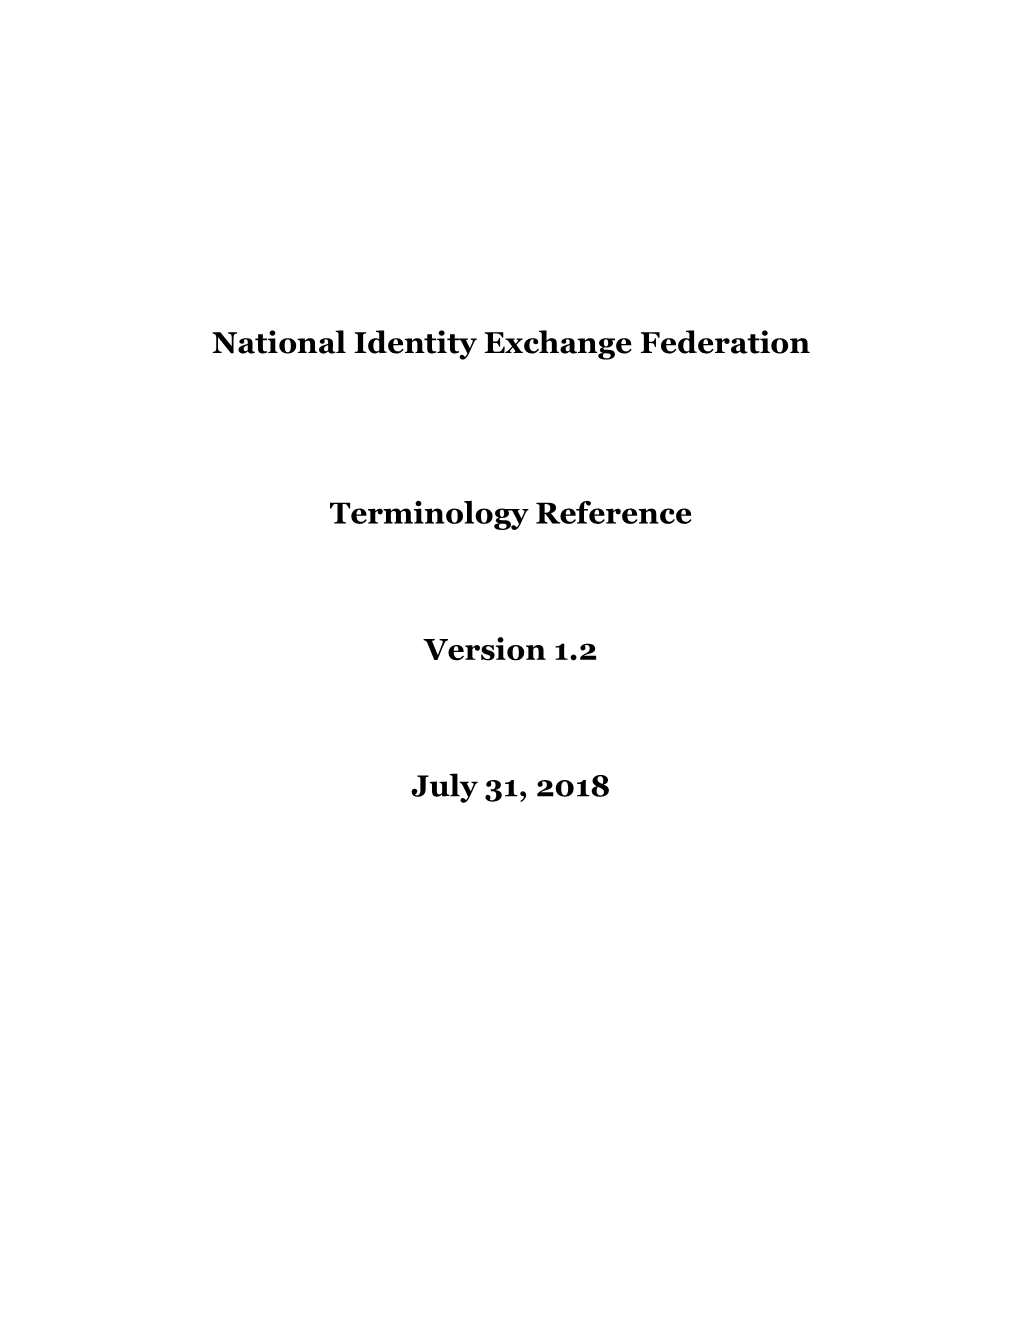 NIEF Terminology Reference Version 1.2